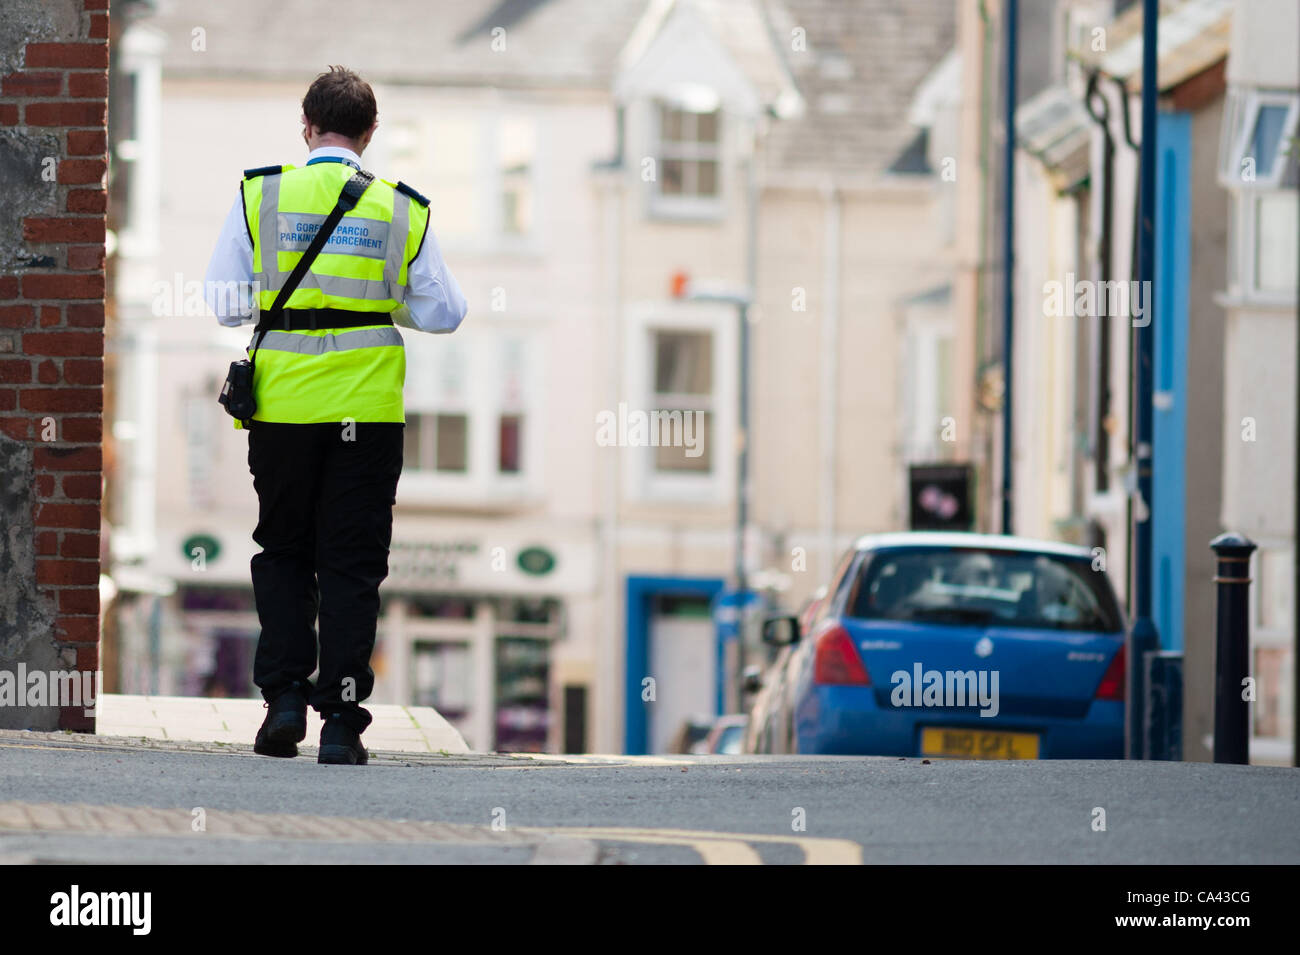 Ceredigion County Council 'Parking Enforcement Officers' on the streets of Aberystwyth on the first day of their official work, now legally empowered to issue fixed penalty notices for parking violations June 4 2021 Stock Photo